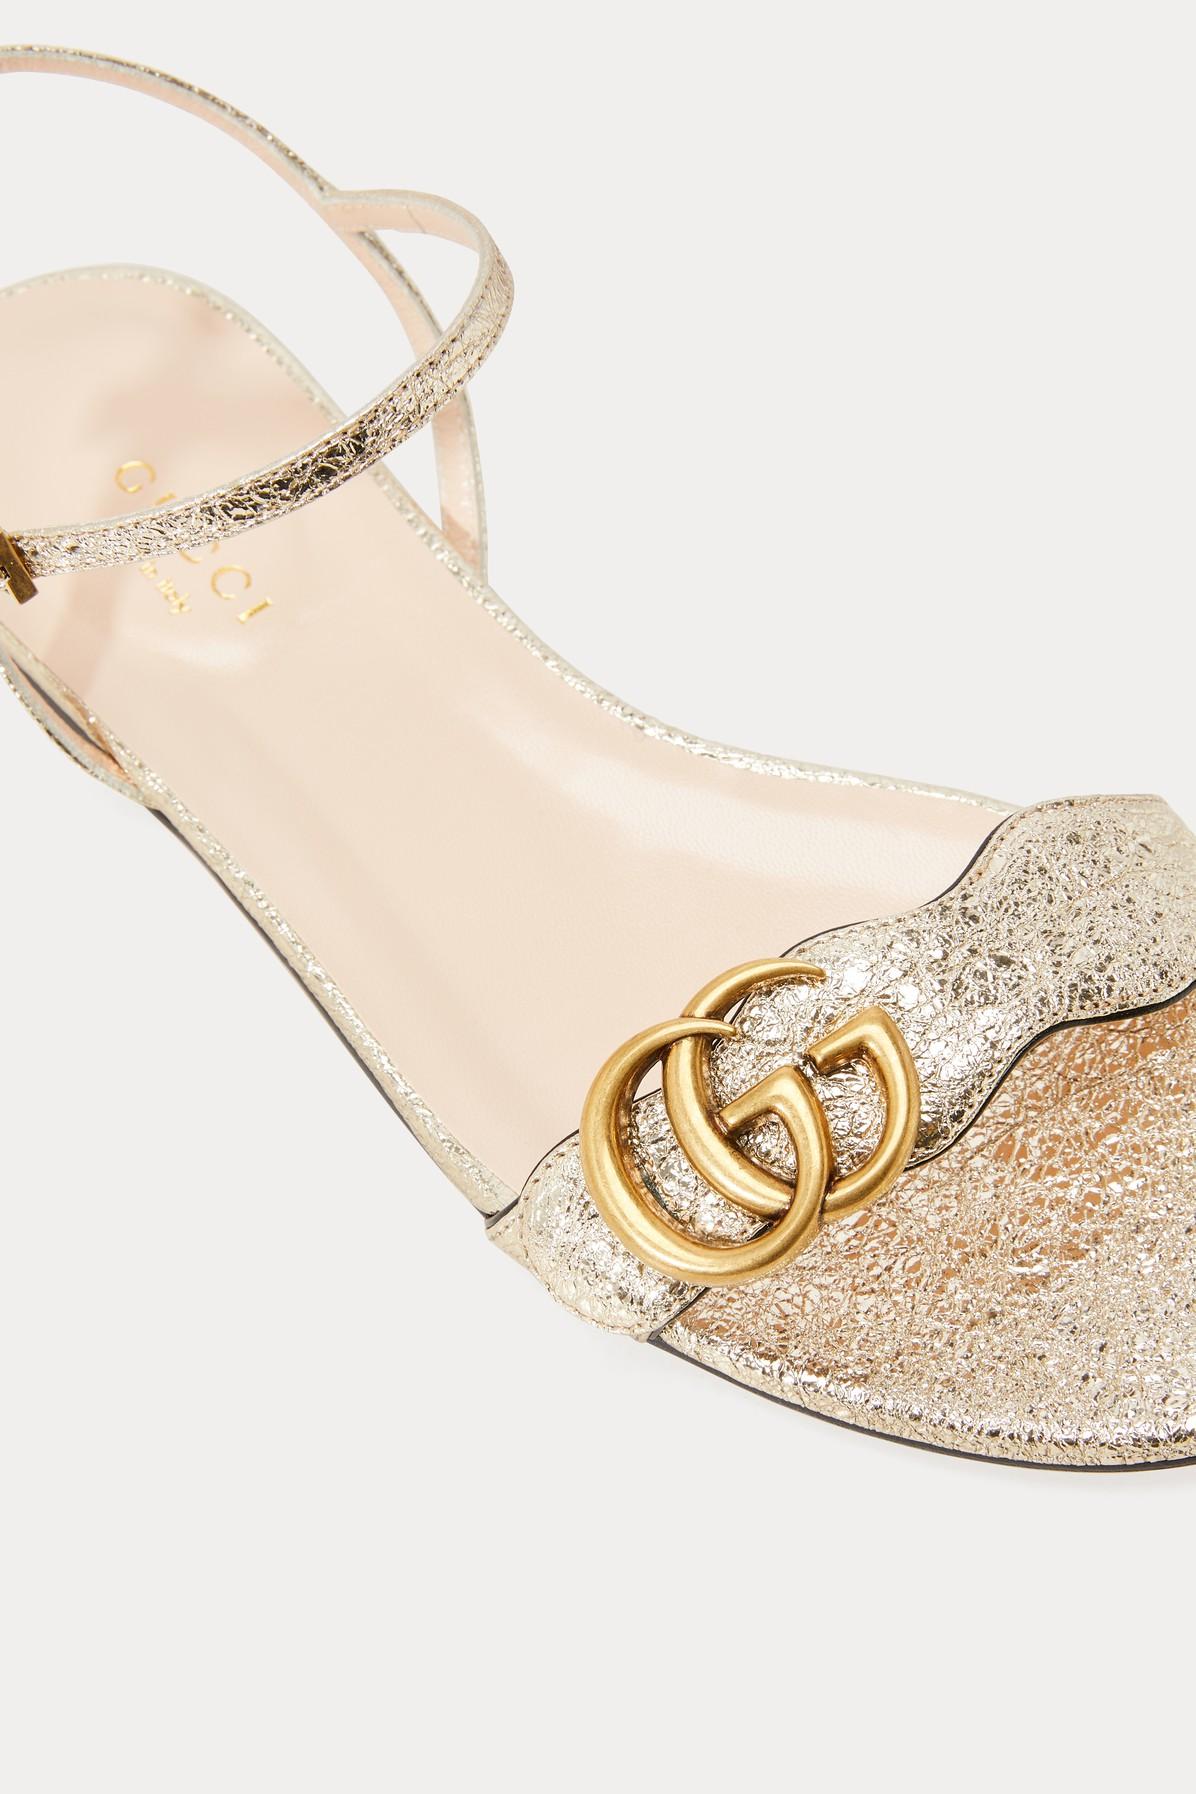 Gucci Leather GG Marmont Sandals in Gold (Metallic) - Lyst